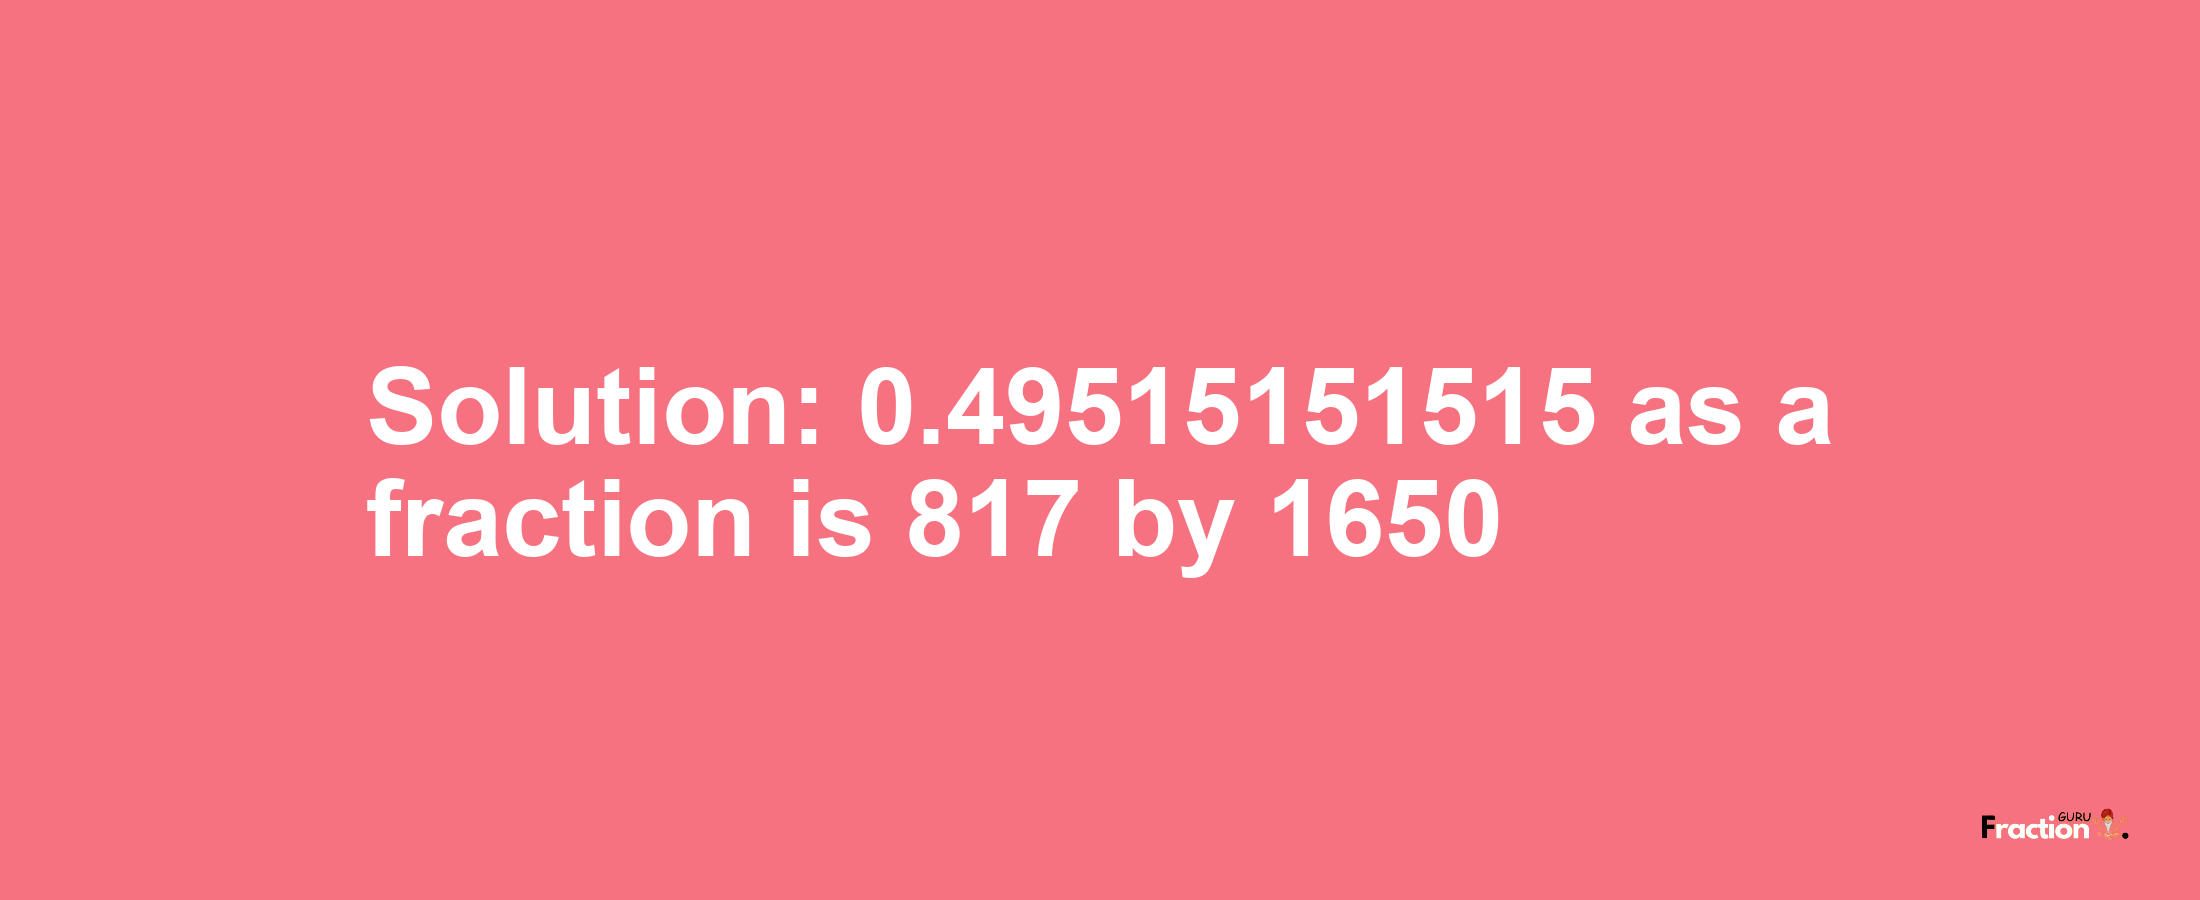 Solution:0.49515151515 as a fraction is 817/1650